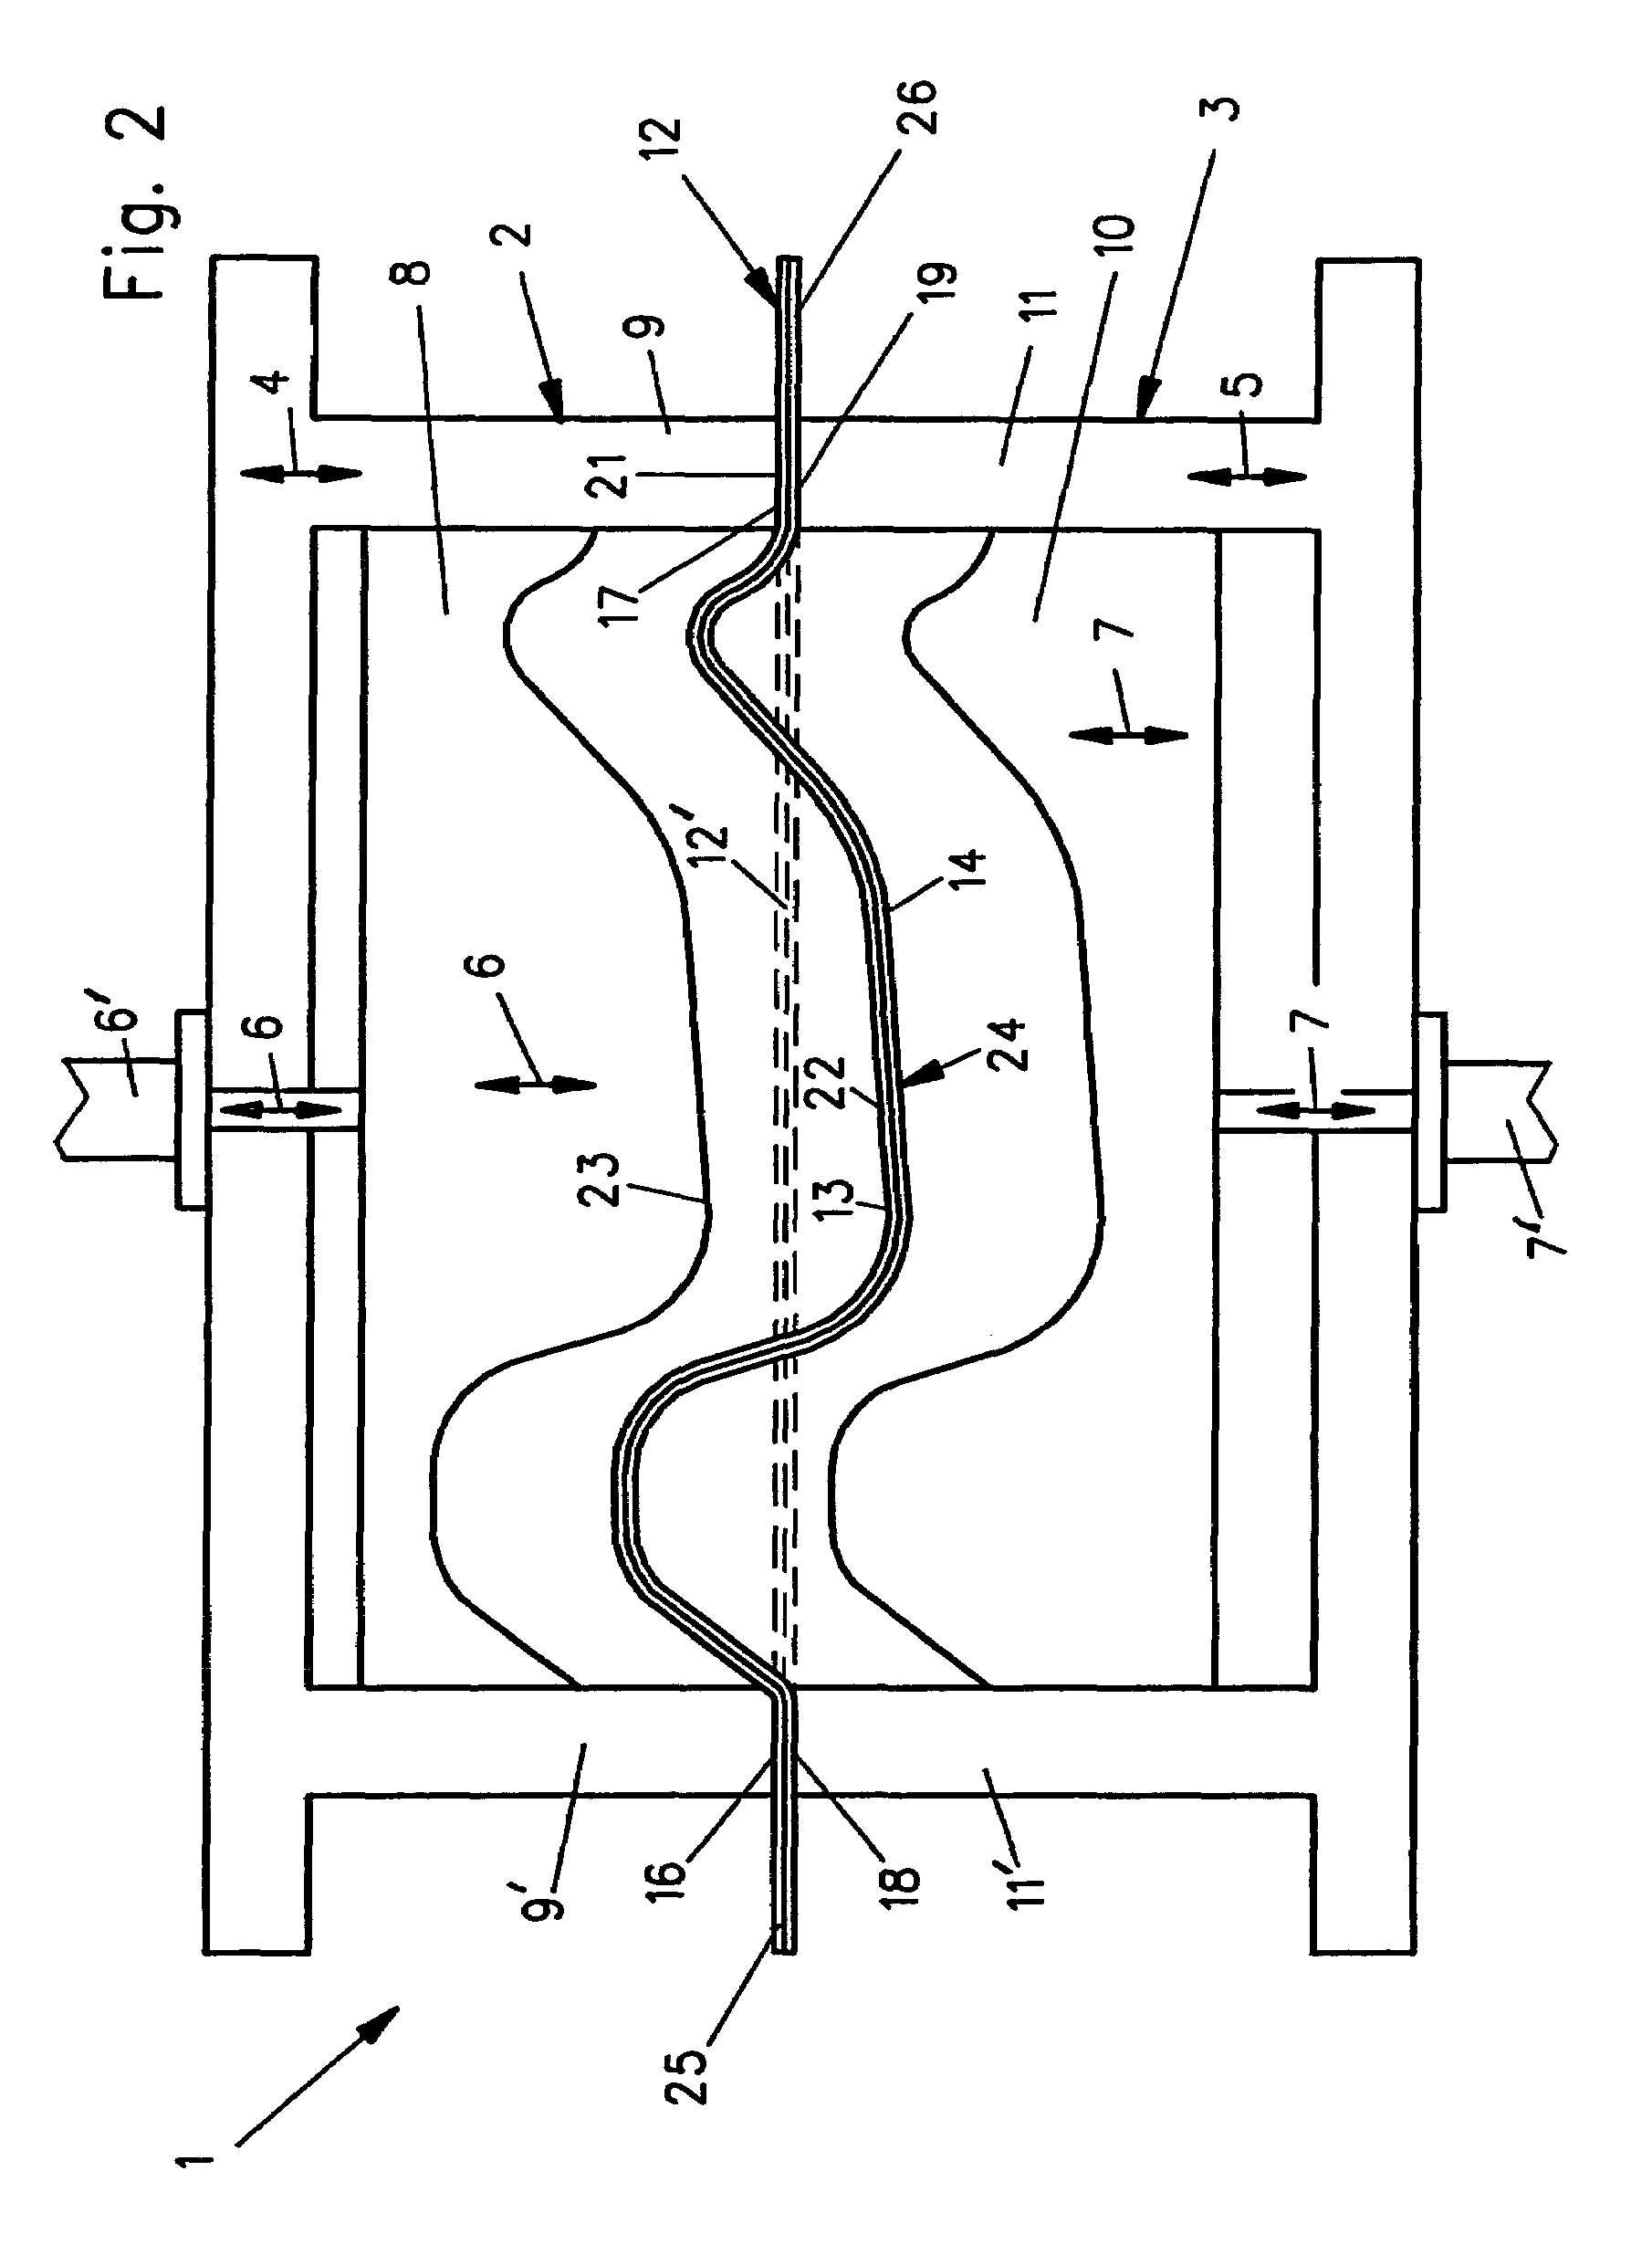 Method and apparatus for molding a laminated trim component without use of slip frame